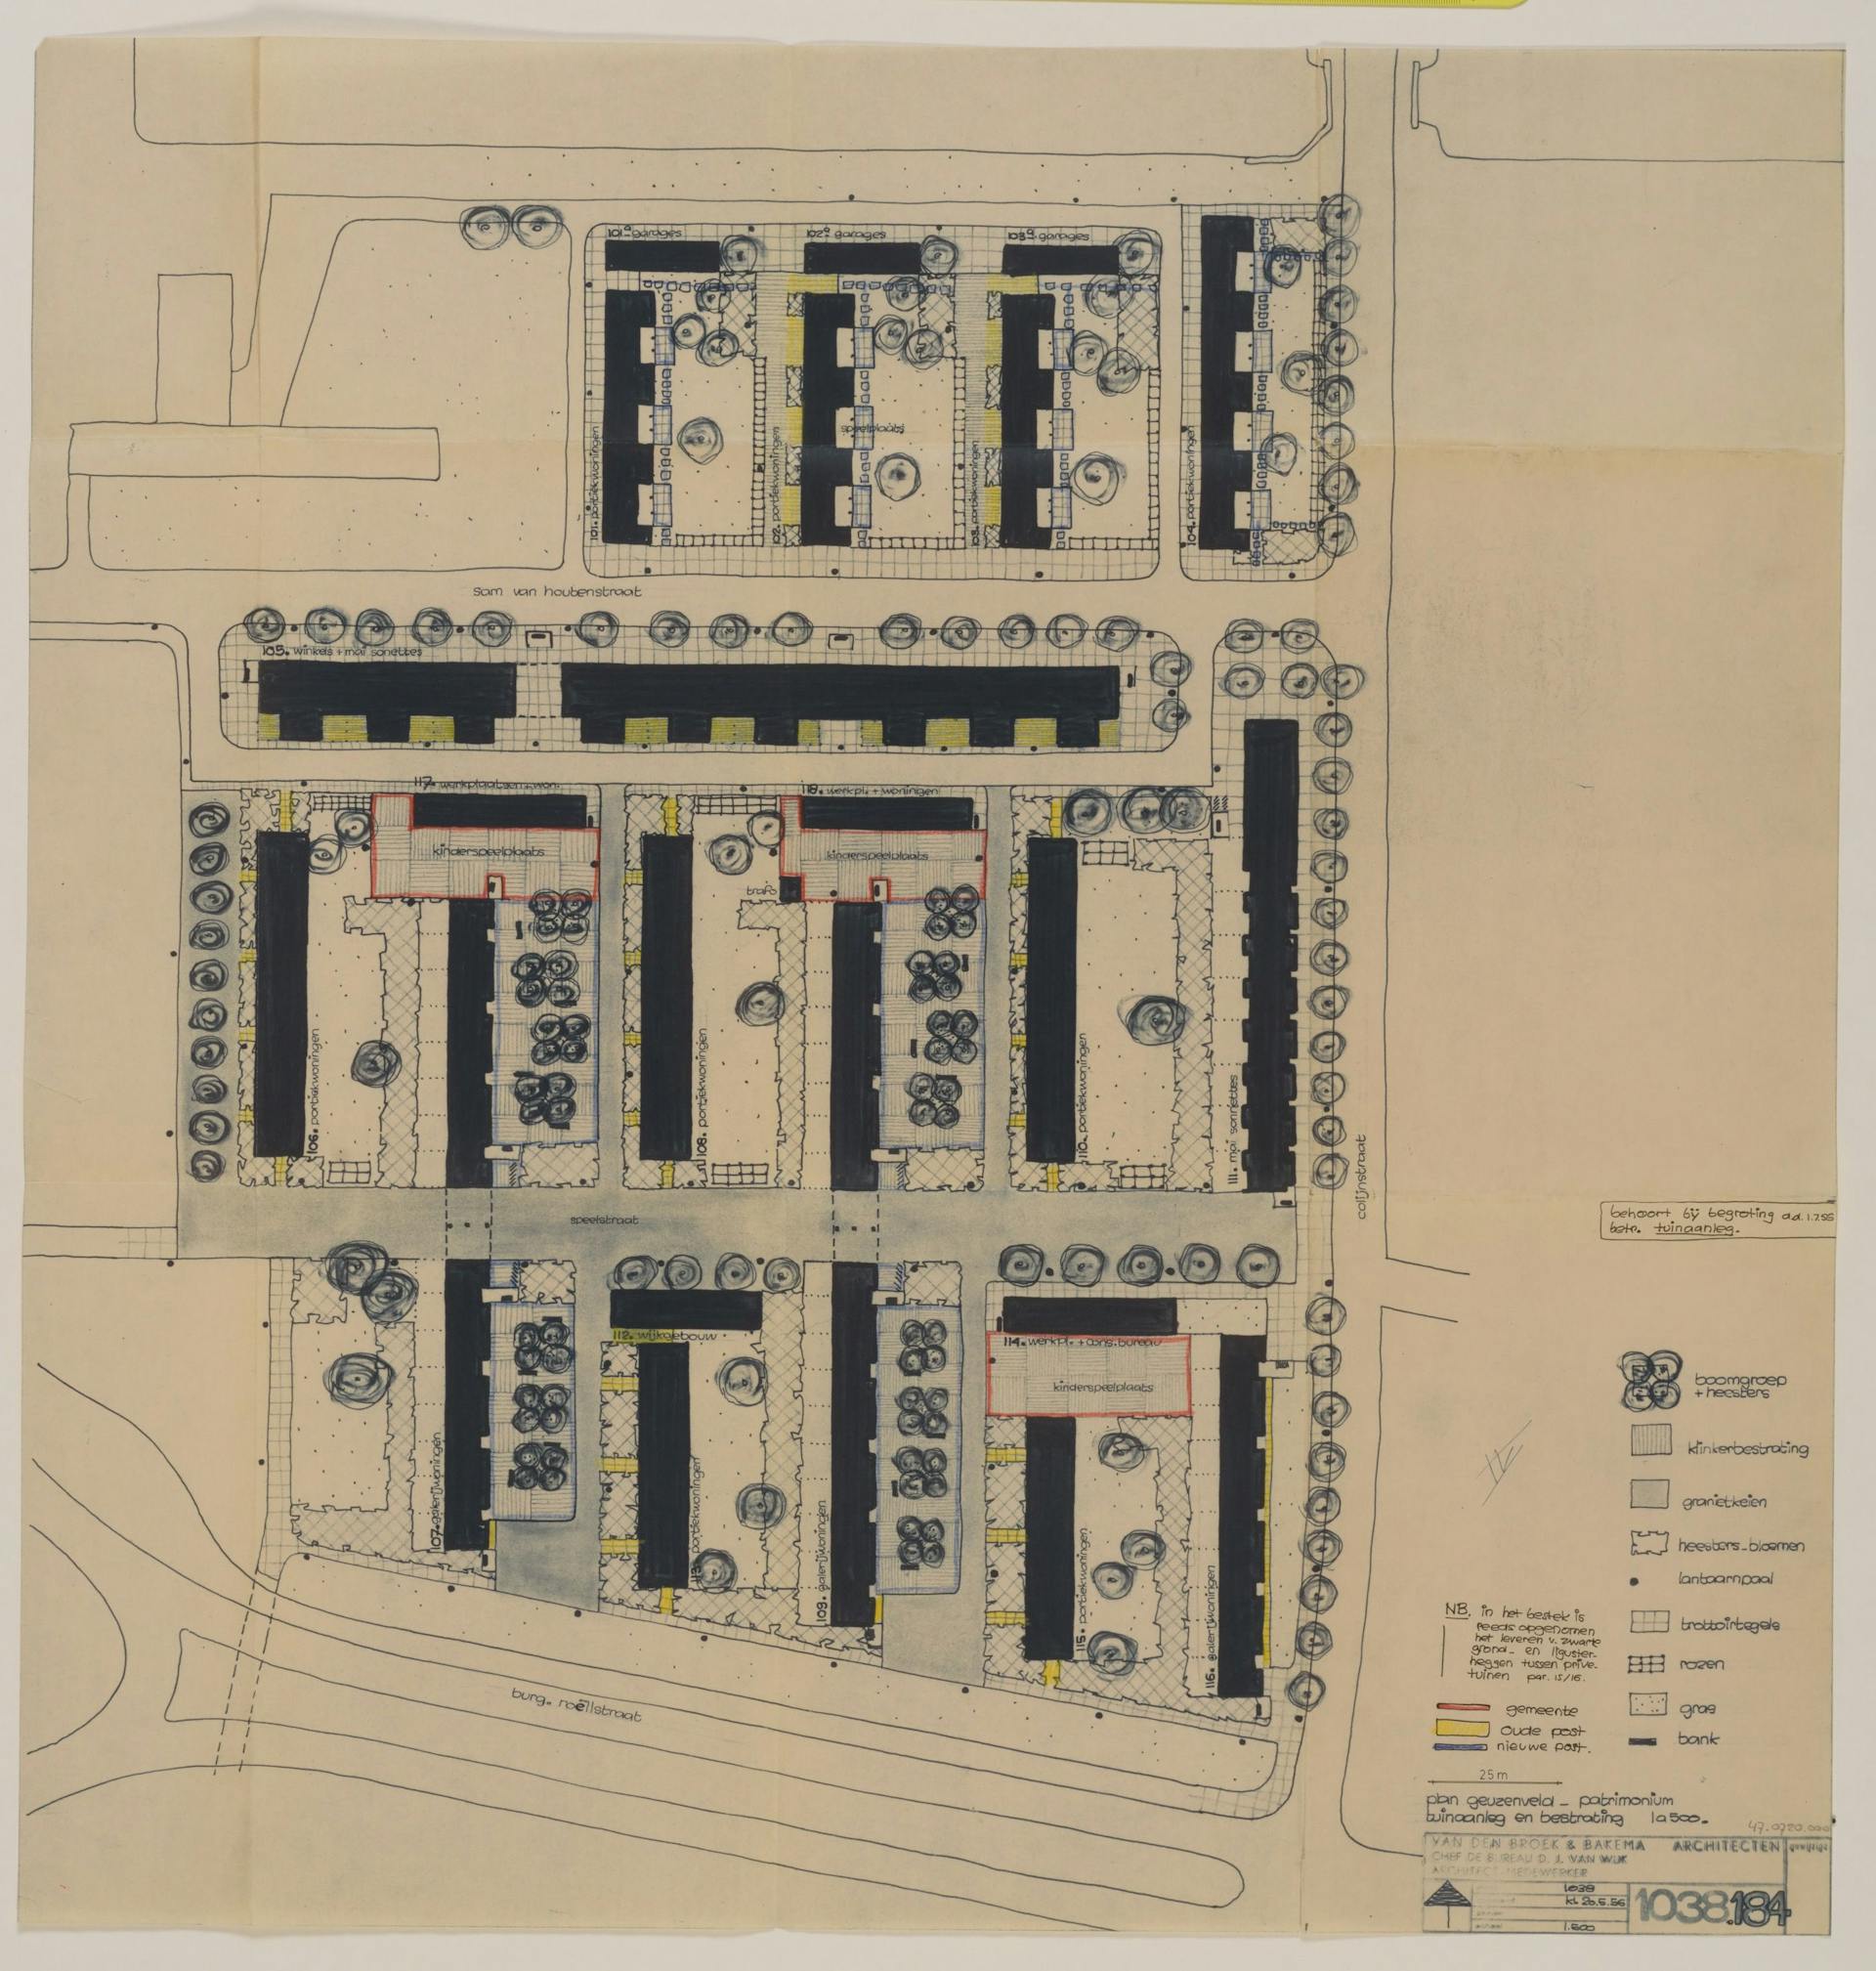 Mien Ruys. Design of the courts in the Dirk Sonoystraat, Amsterdam, 1958. Special Collections Wageningen University & Research, Wageningen. 